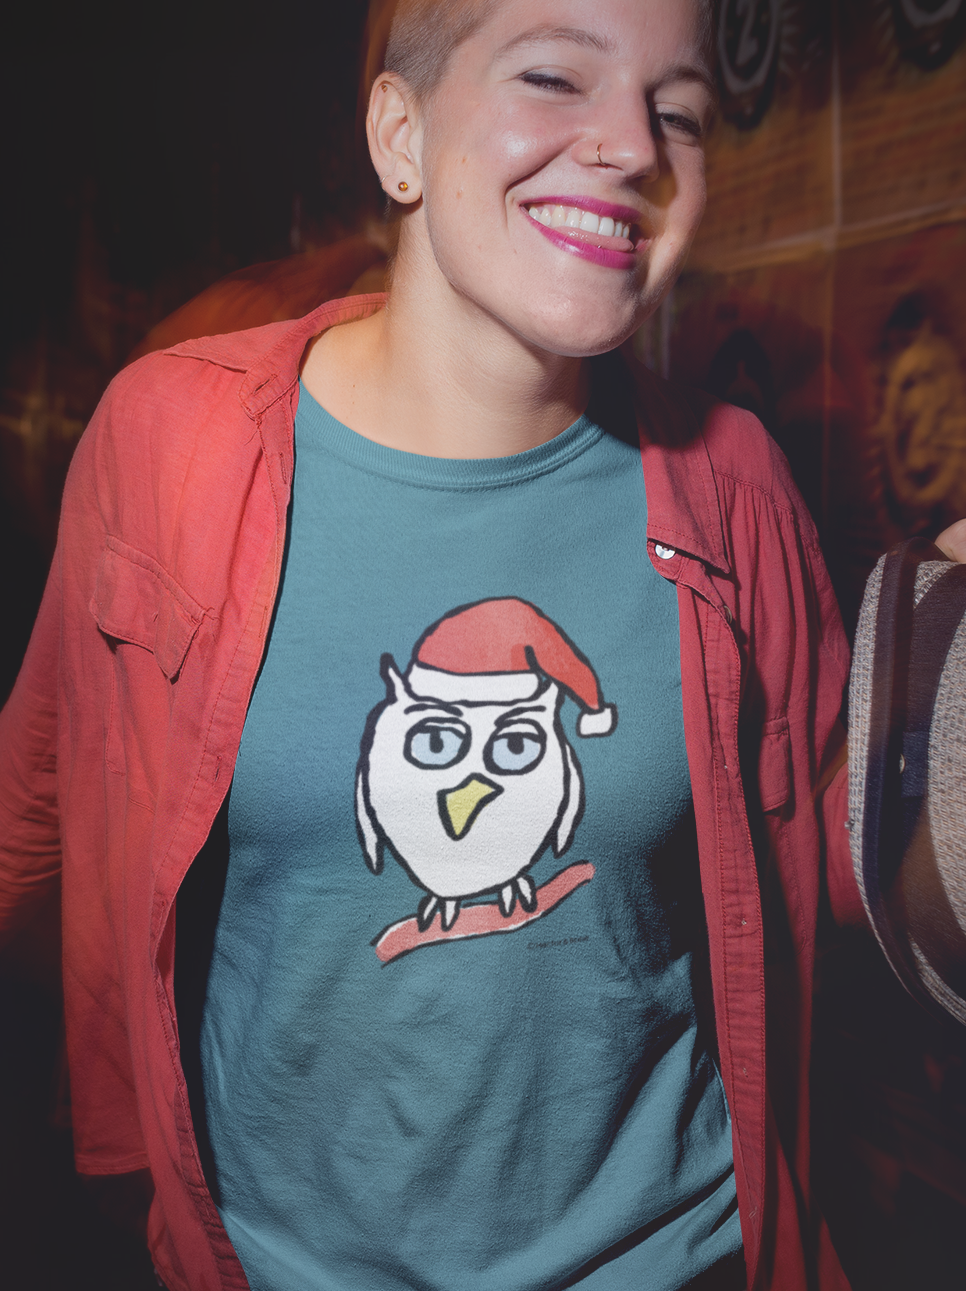 Santa Night Owl Christmas T-shirt - Happy young woman wearing an Illustrated funny Xmas night owl on a night blue vegan cotton t-shirt by Hector and Bone